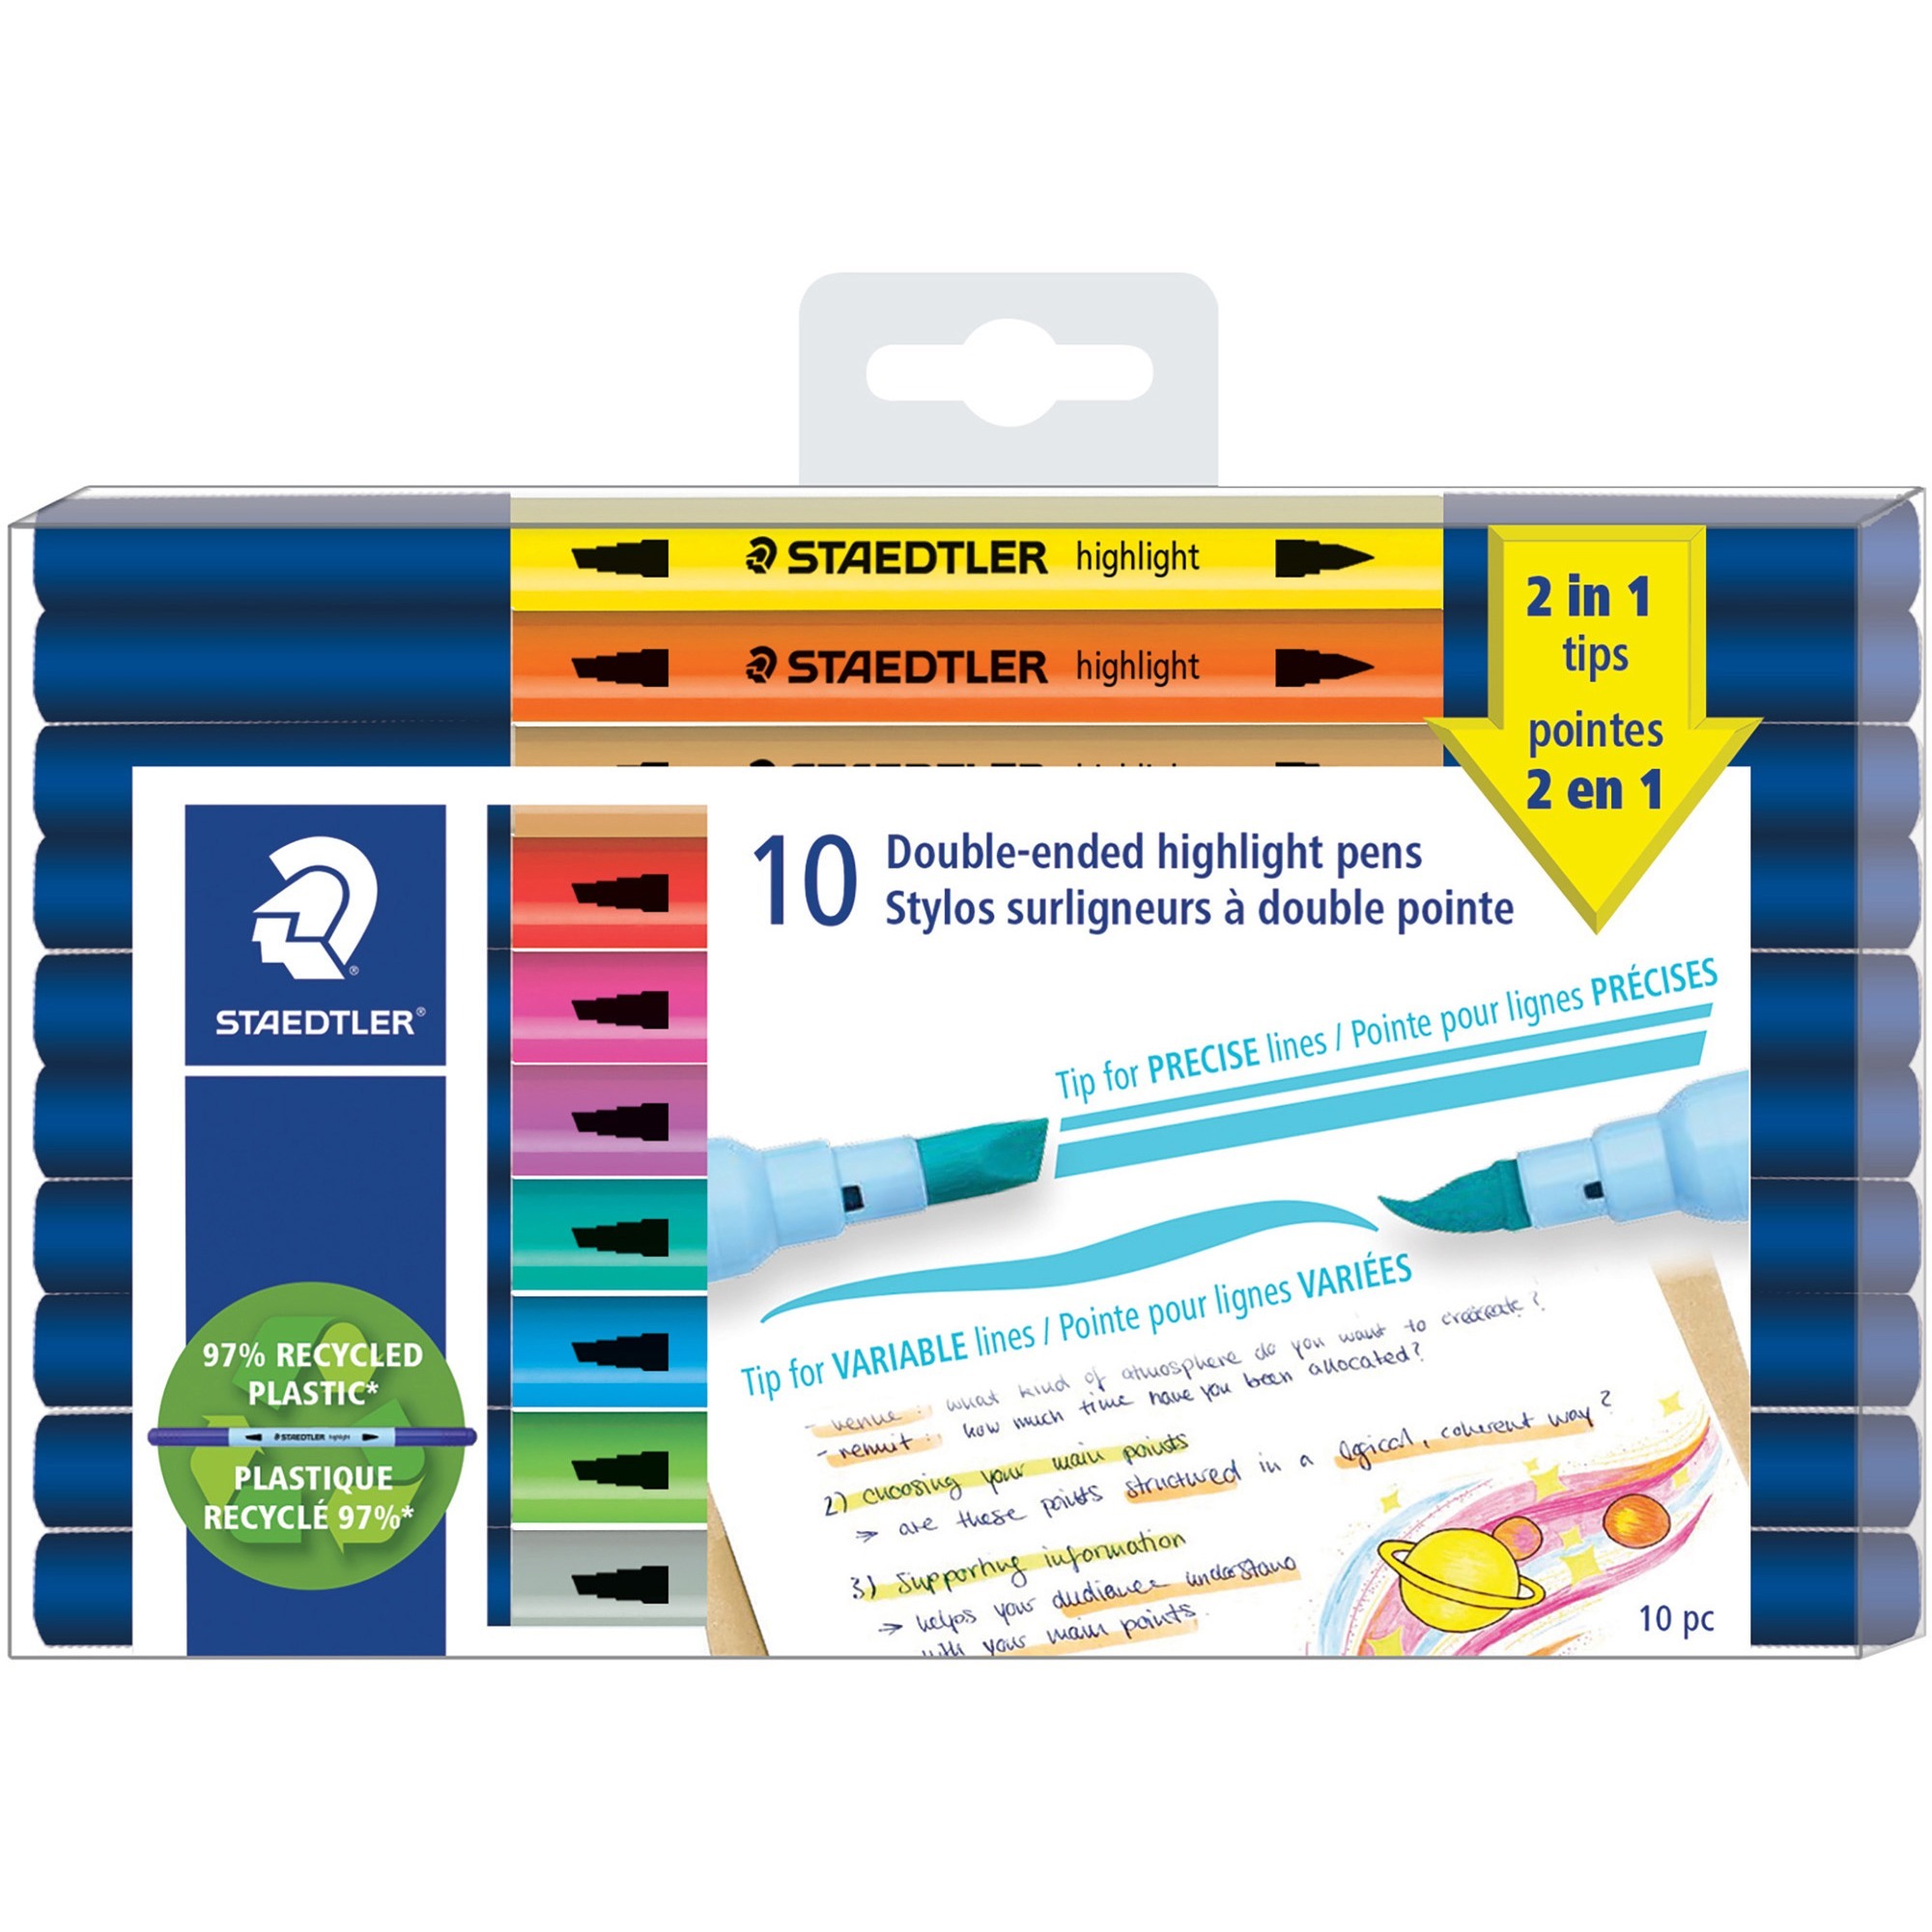 Staedtler Double-ended Highlighter Pens (3620tb10a6) - Afbeelding 1 van 1